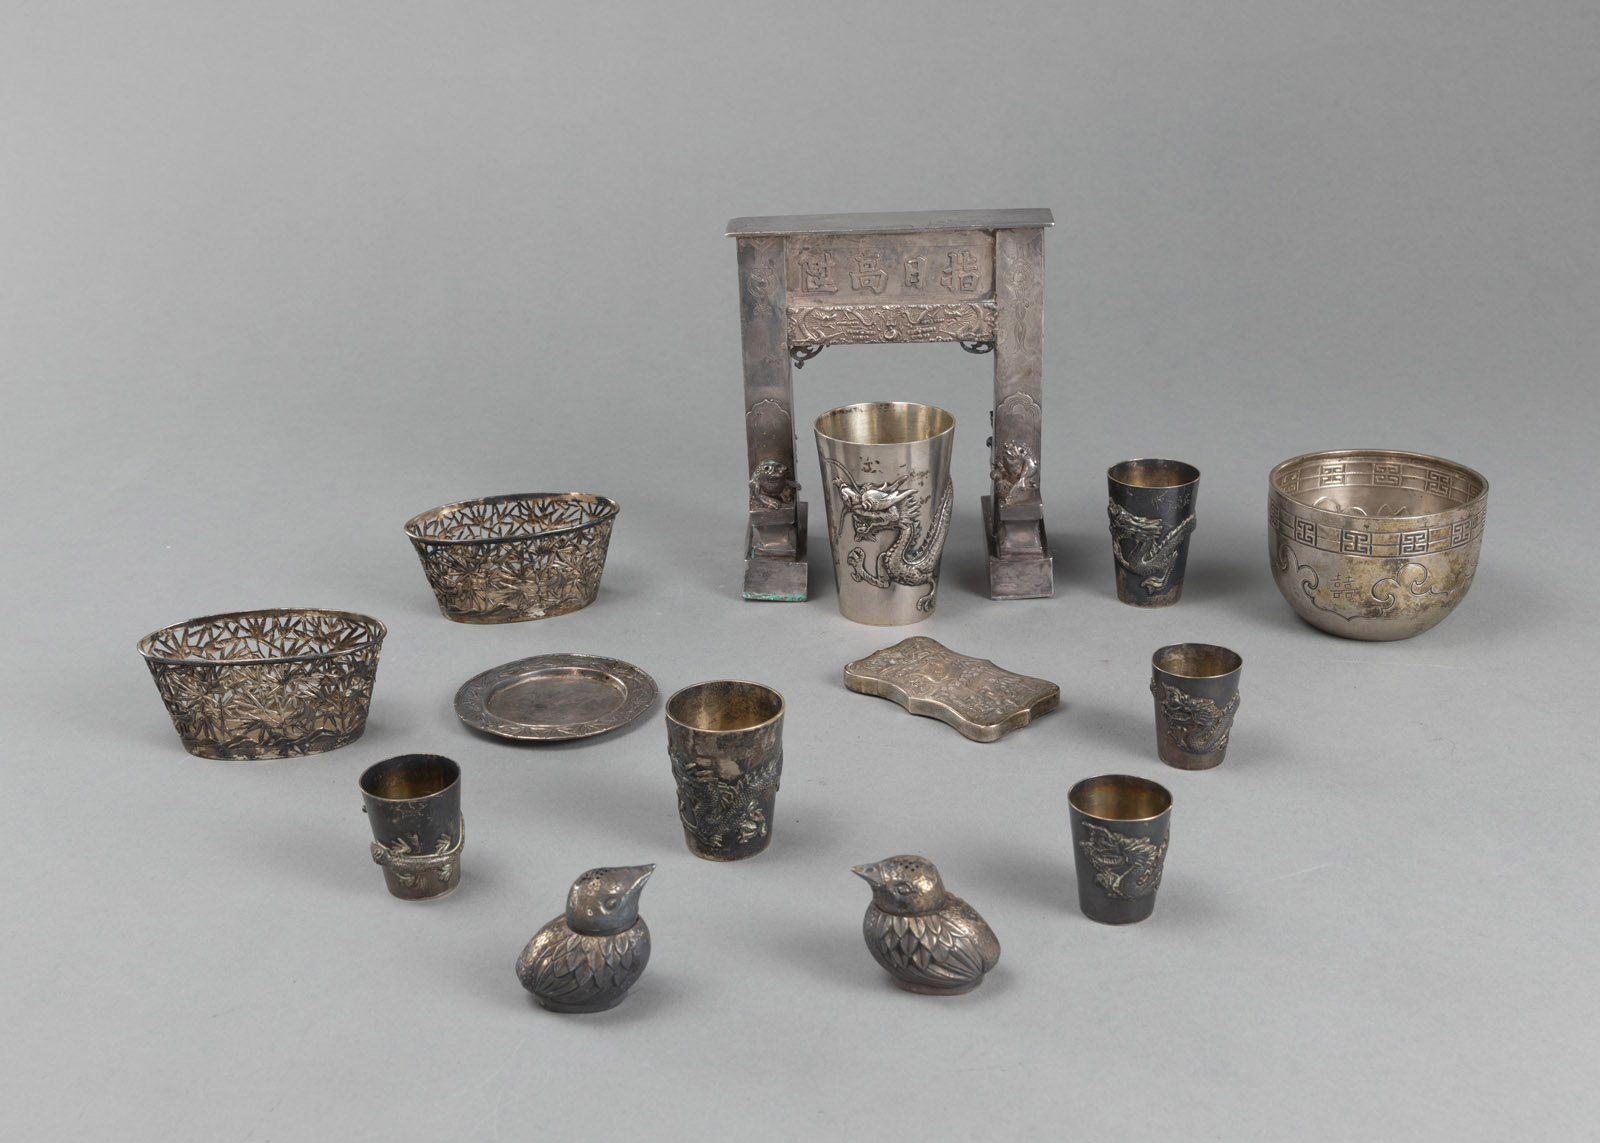 <b>A GROUP OF 14 PIECES OF SILVERWORKS: A MODEL GATE, TWO SALT CELLARS, BOWLS, CUPS, A CARD CASE</b>